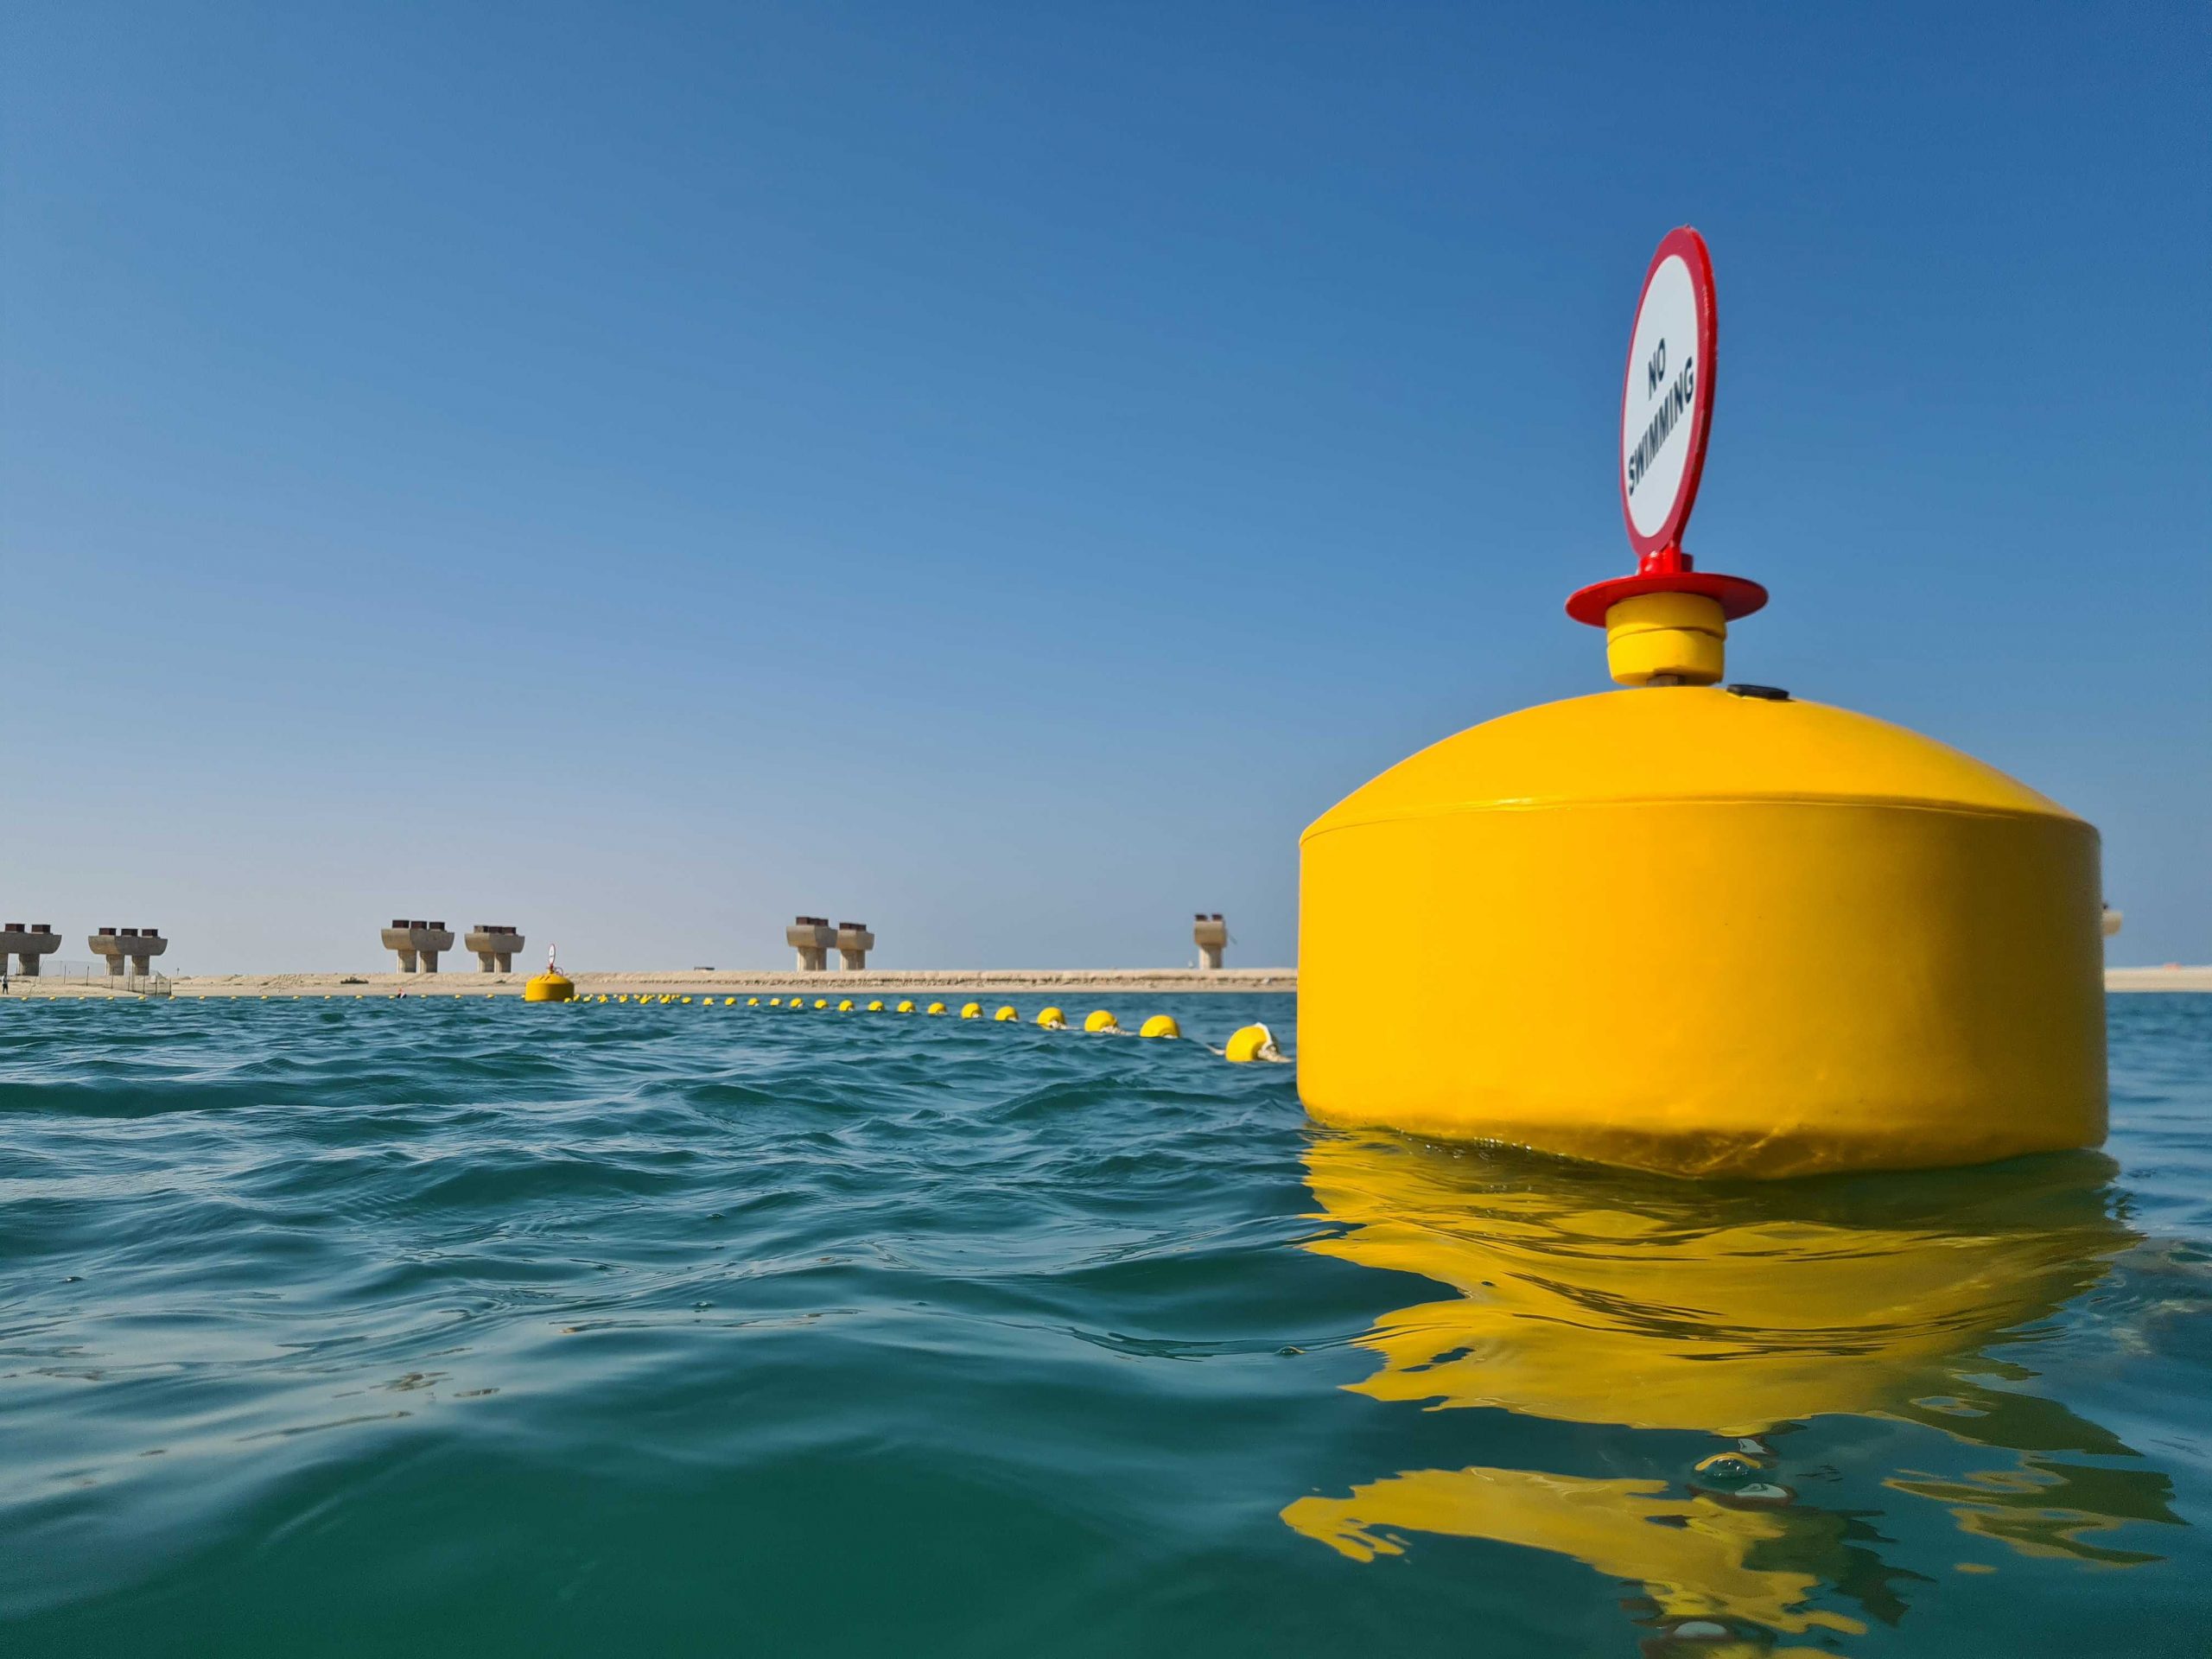 Ecocoast continues operation to replace failing buoys with EFB-650s